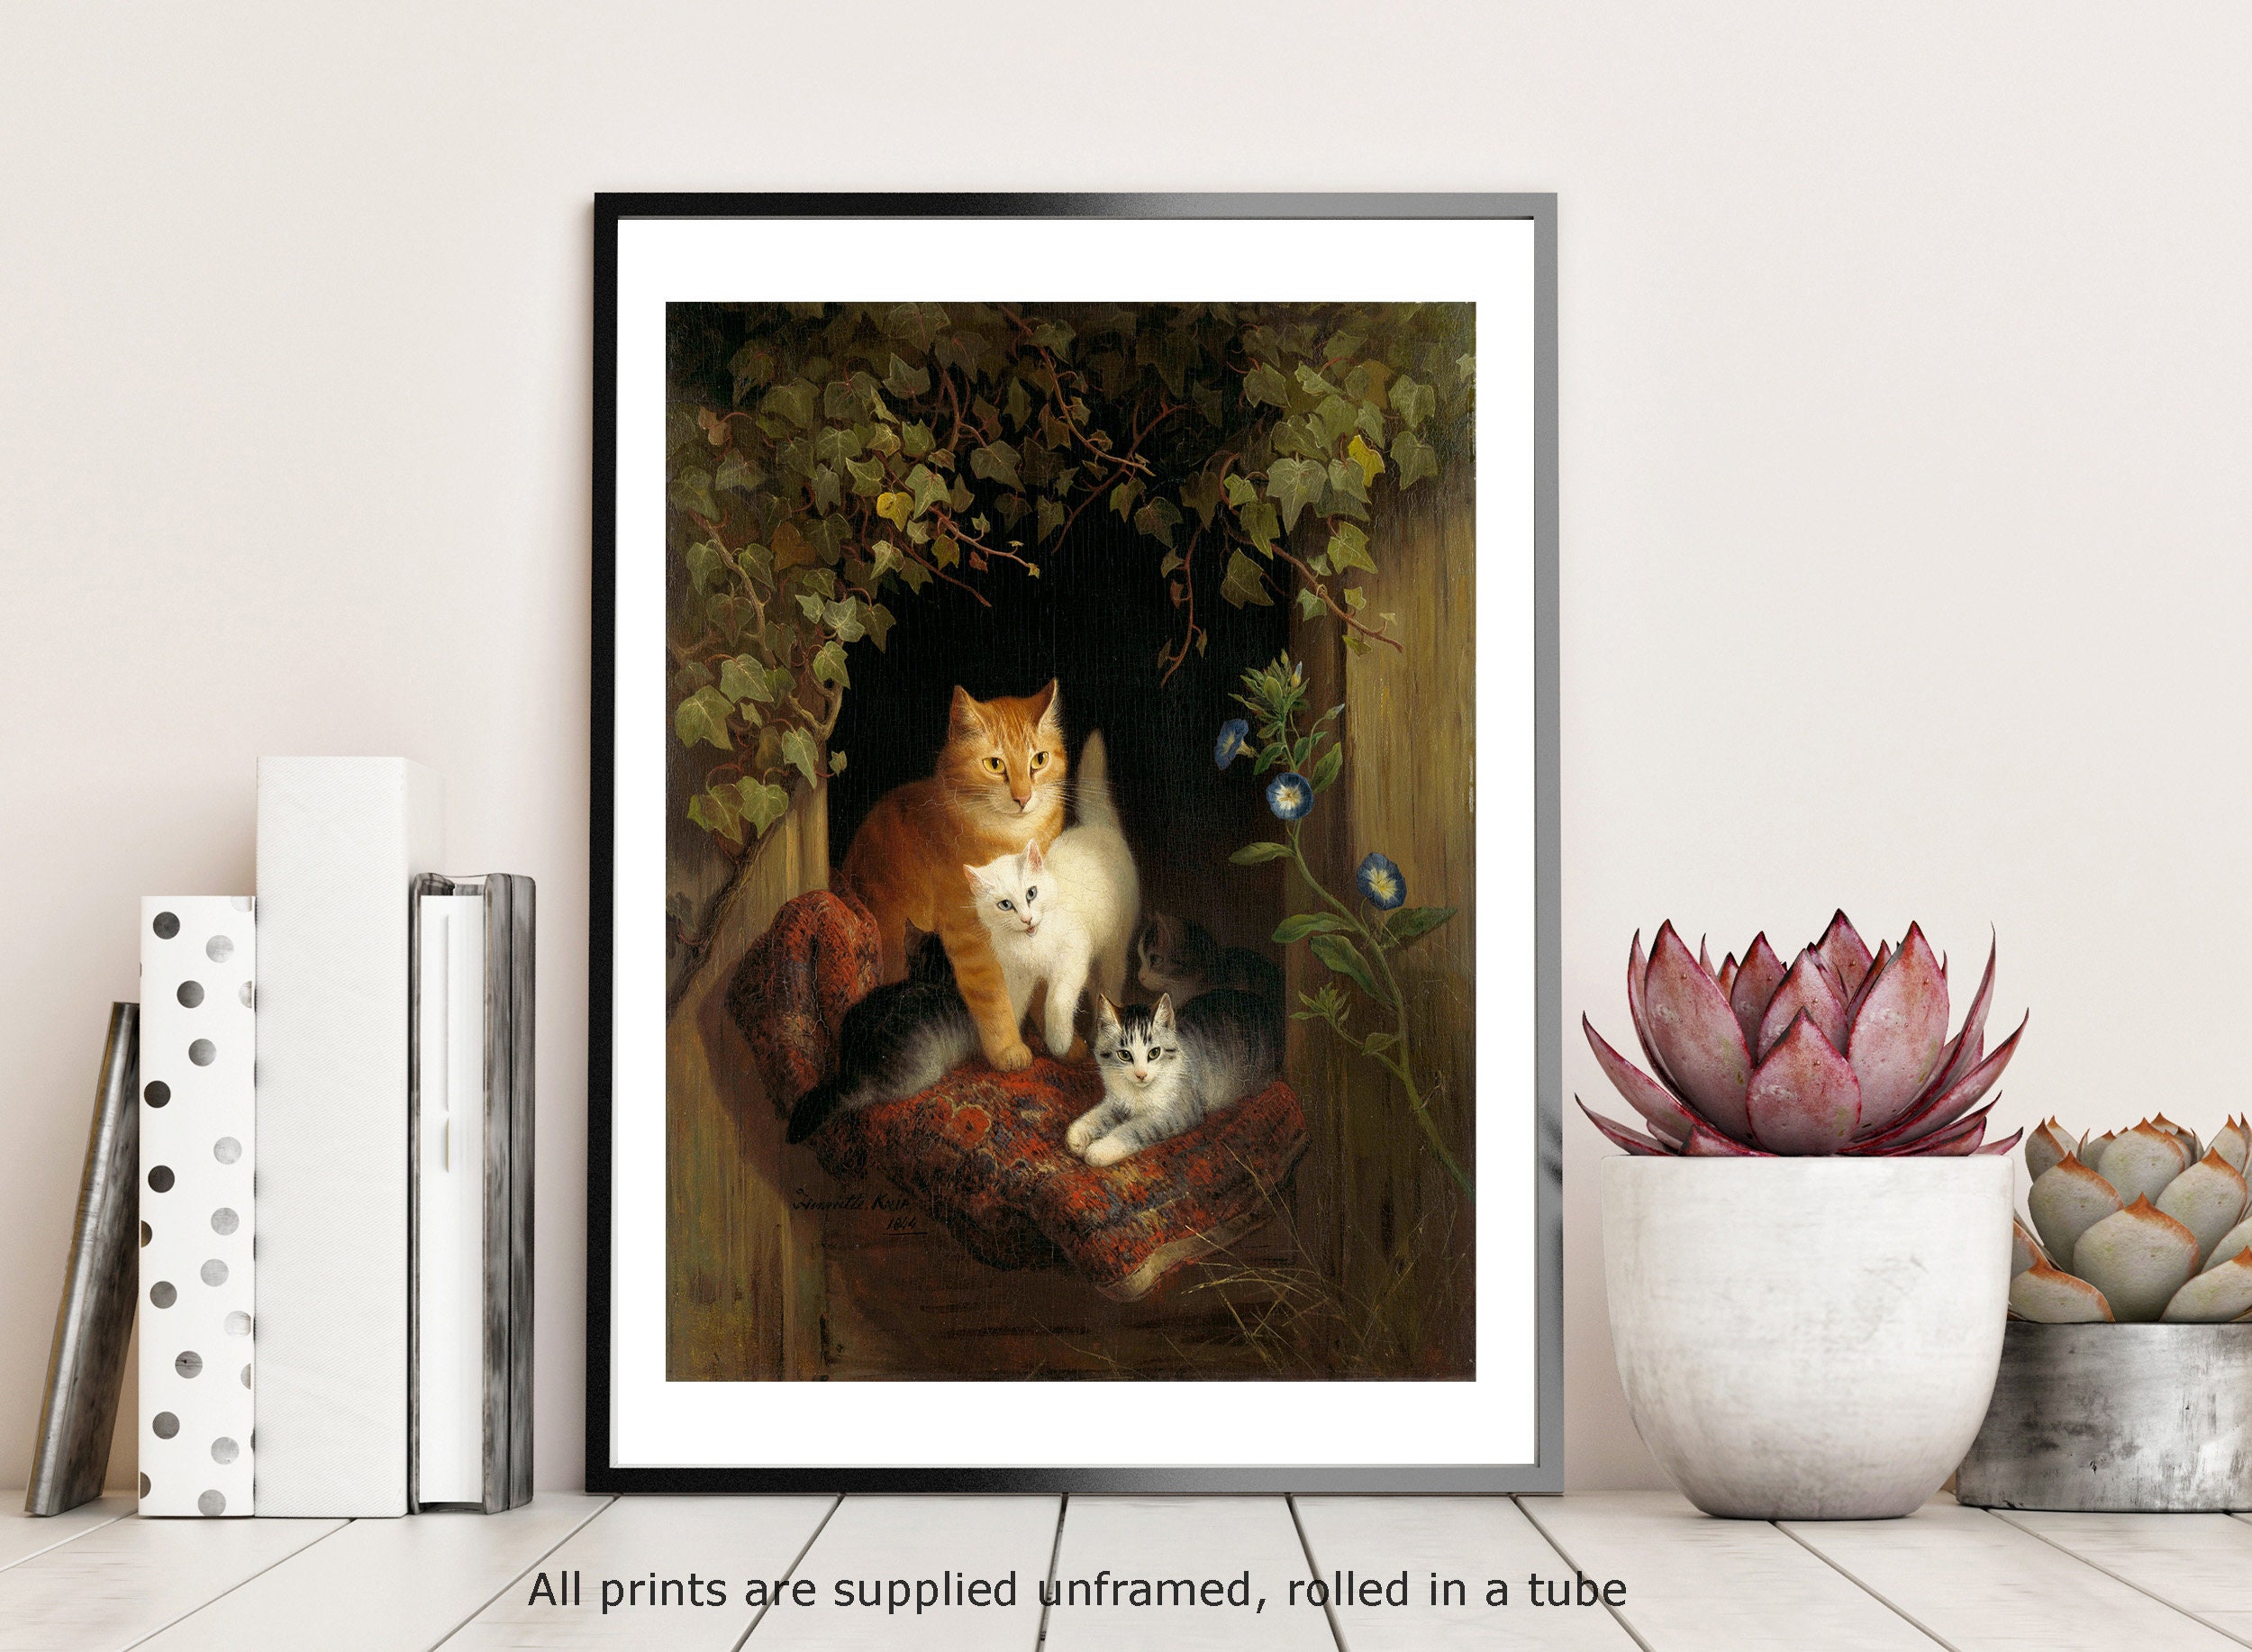 Cat PFP Photographic Print for Sale by Ketrinartistka